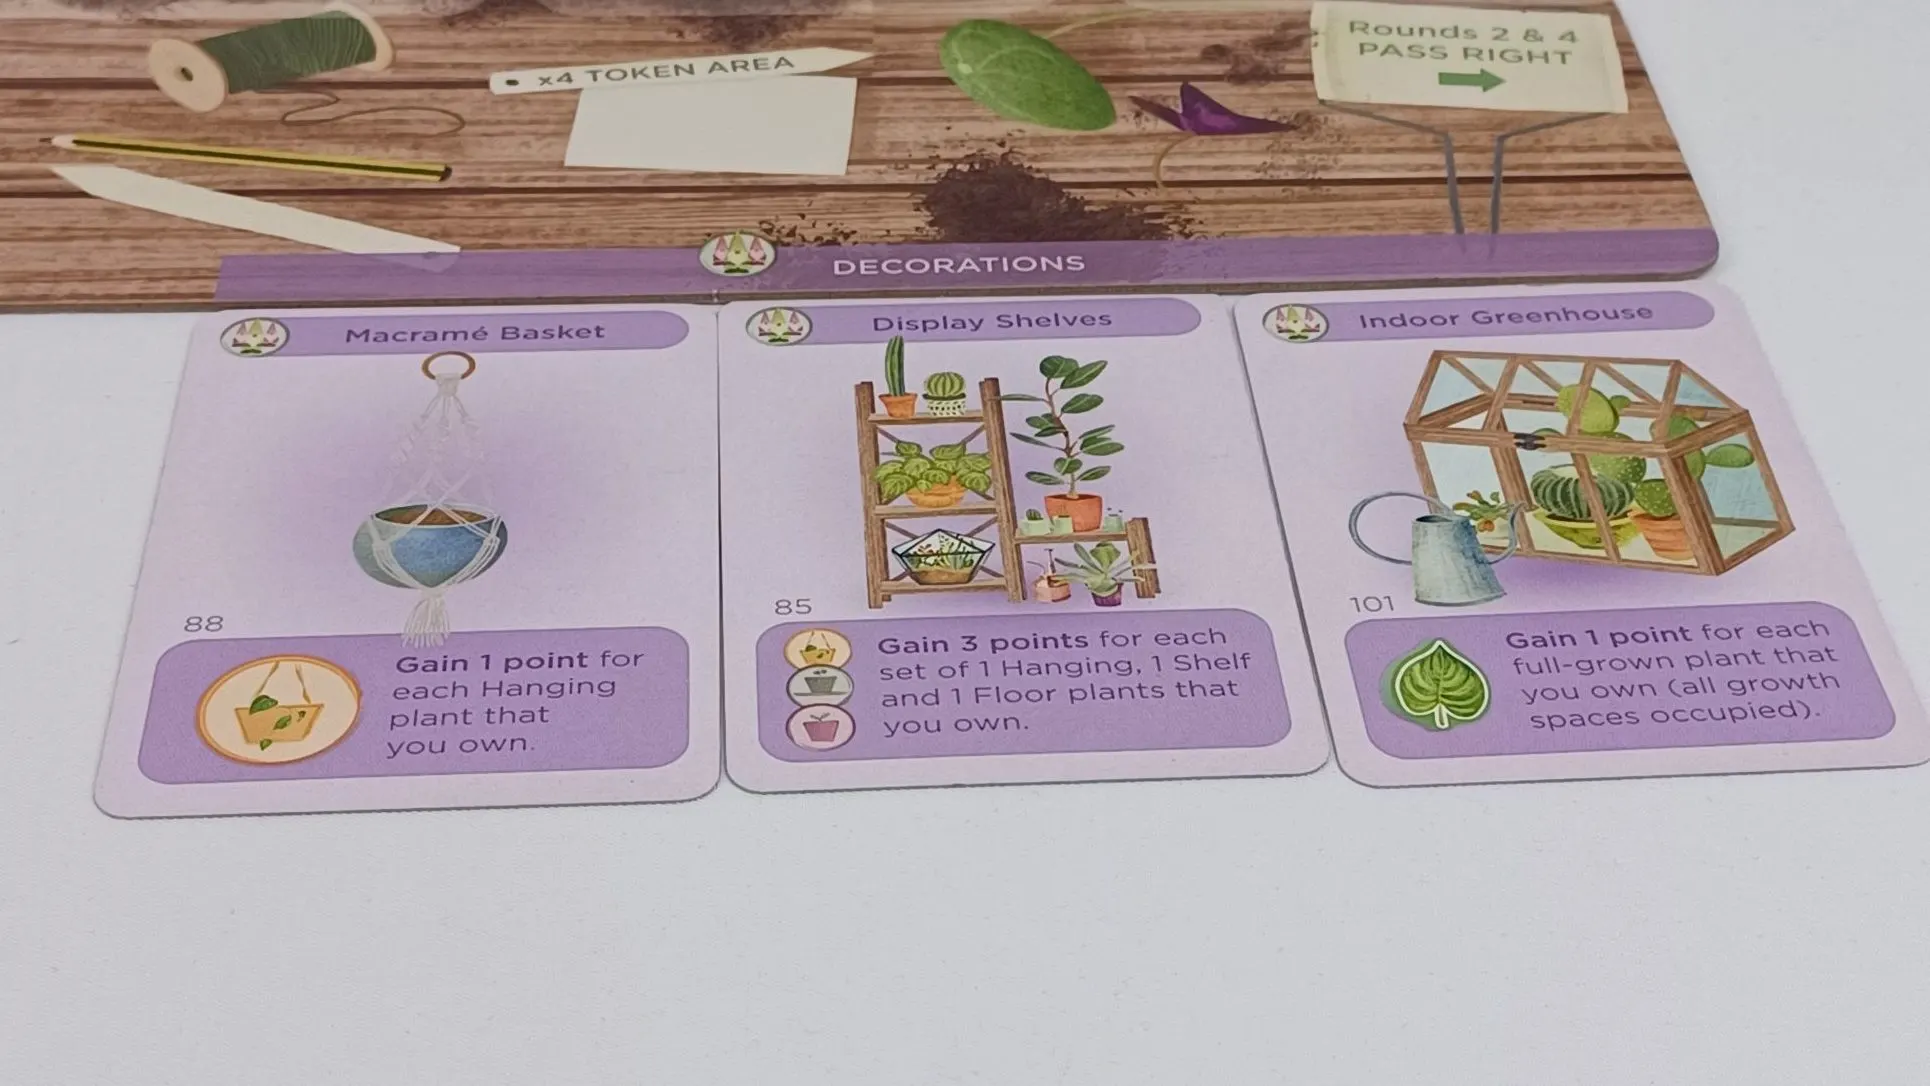 Scoring From Decoration Cards in Planted